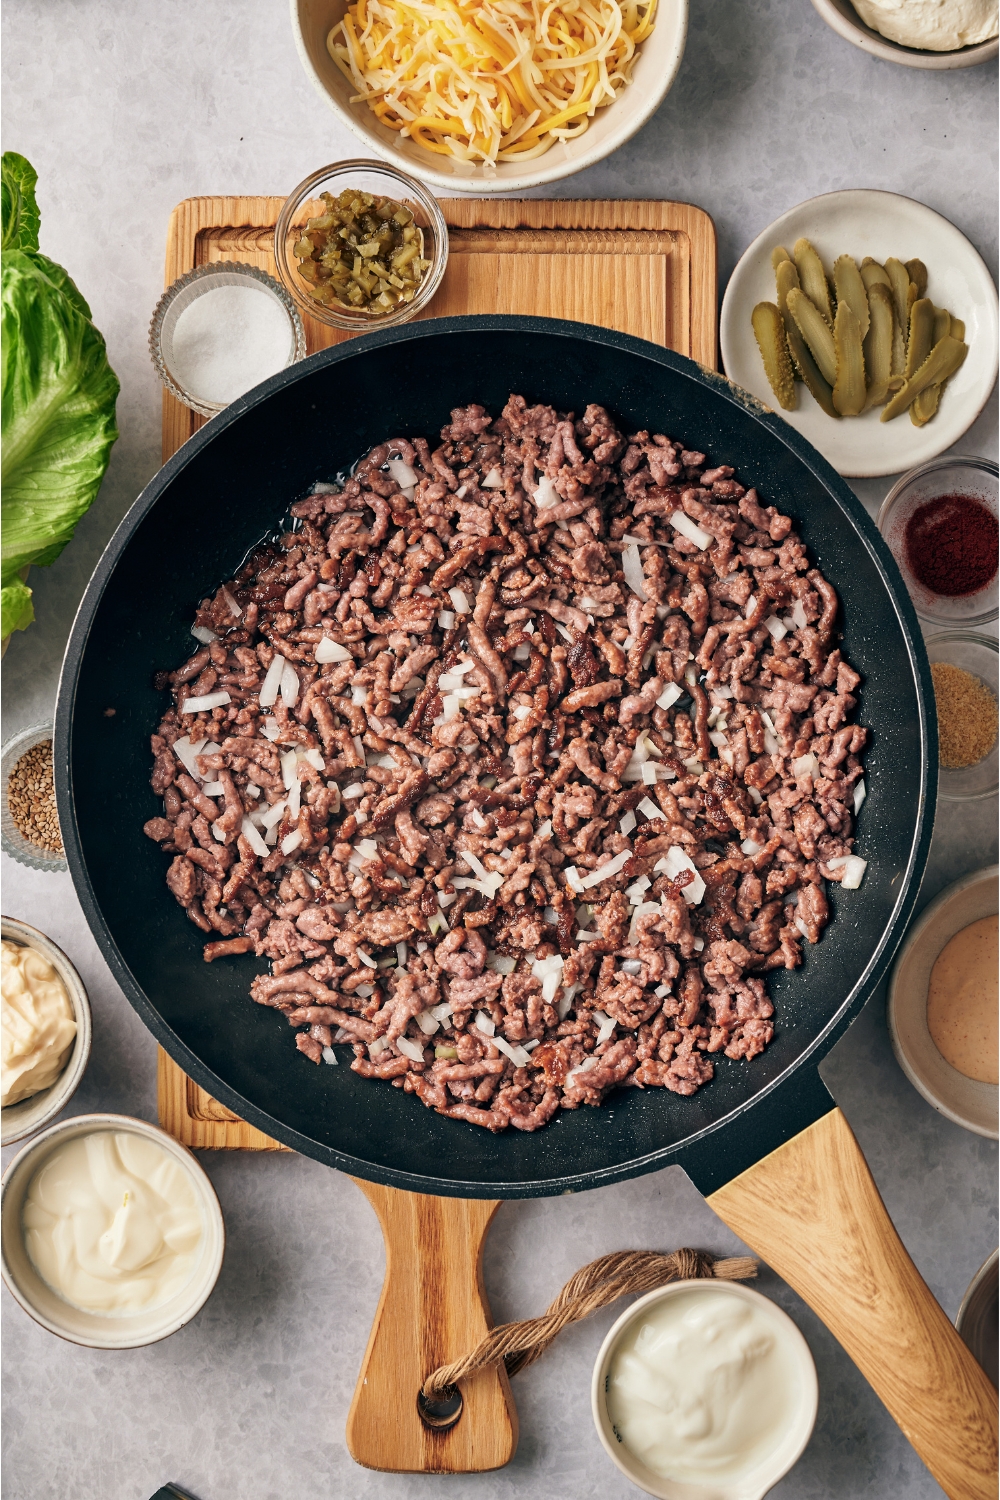 A skillet filled with diced onion and ground beef cooking. The skillet is on a wooden board and surrounded by an assortment of ingredients.